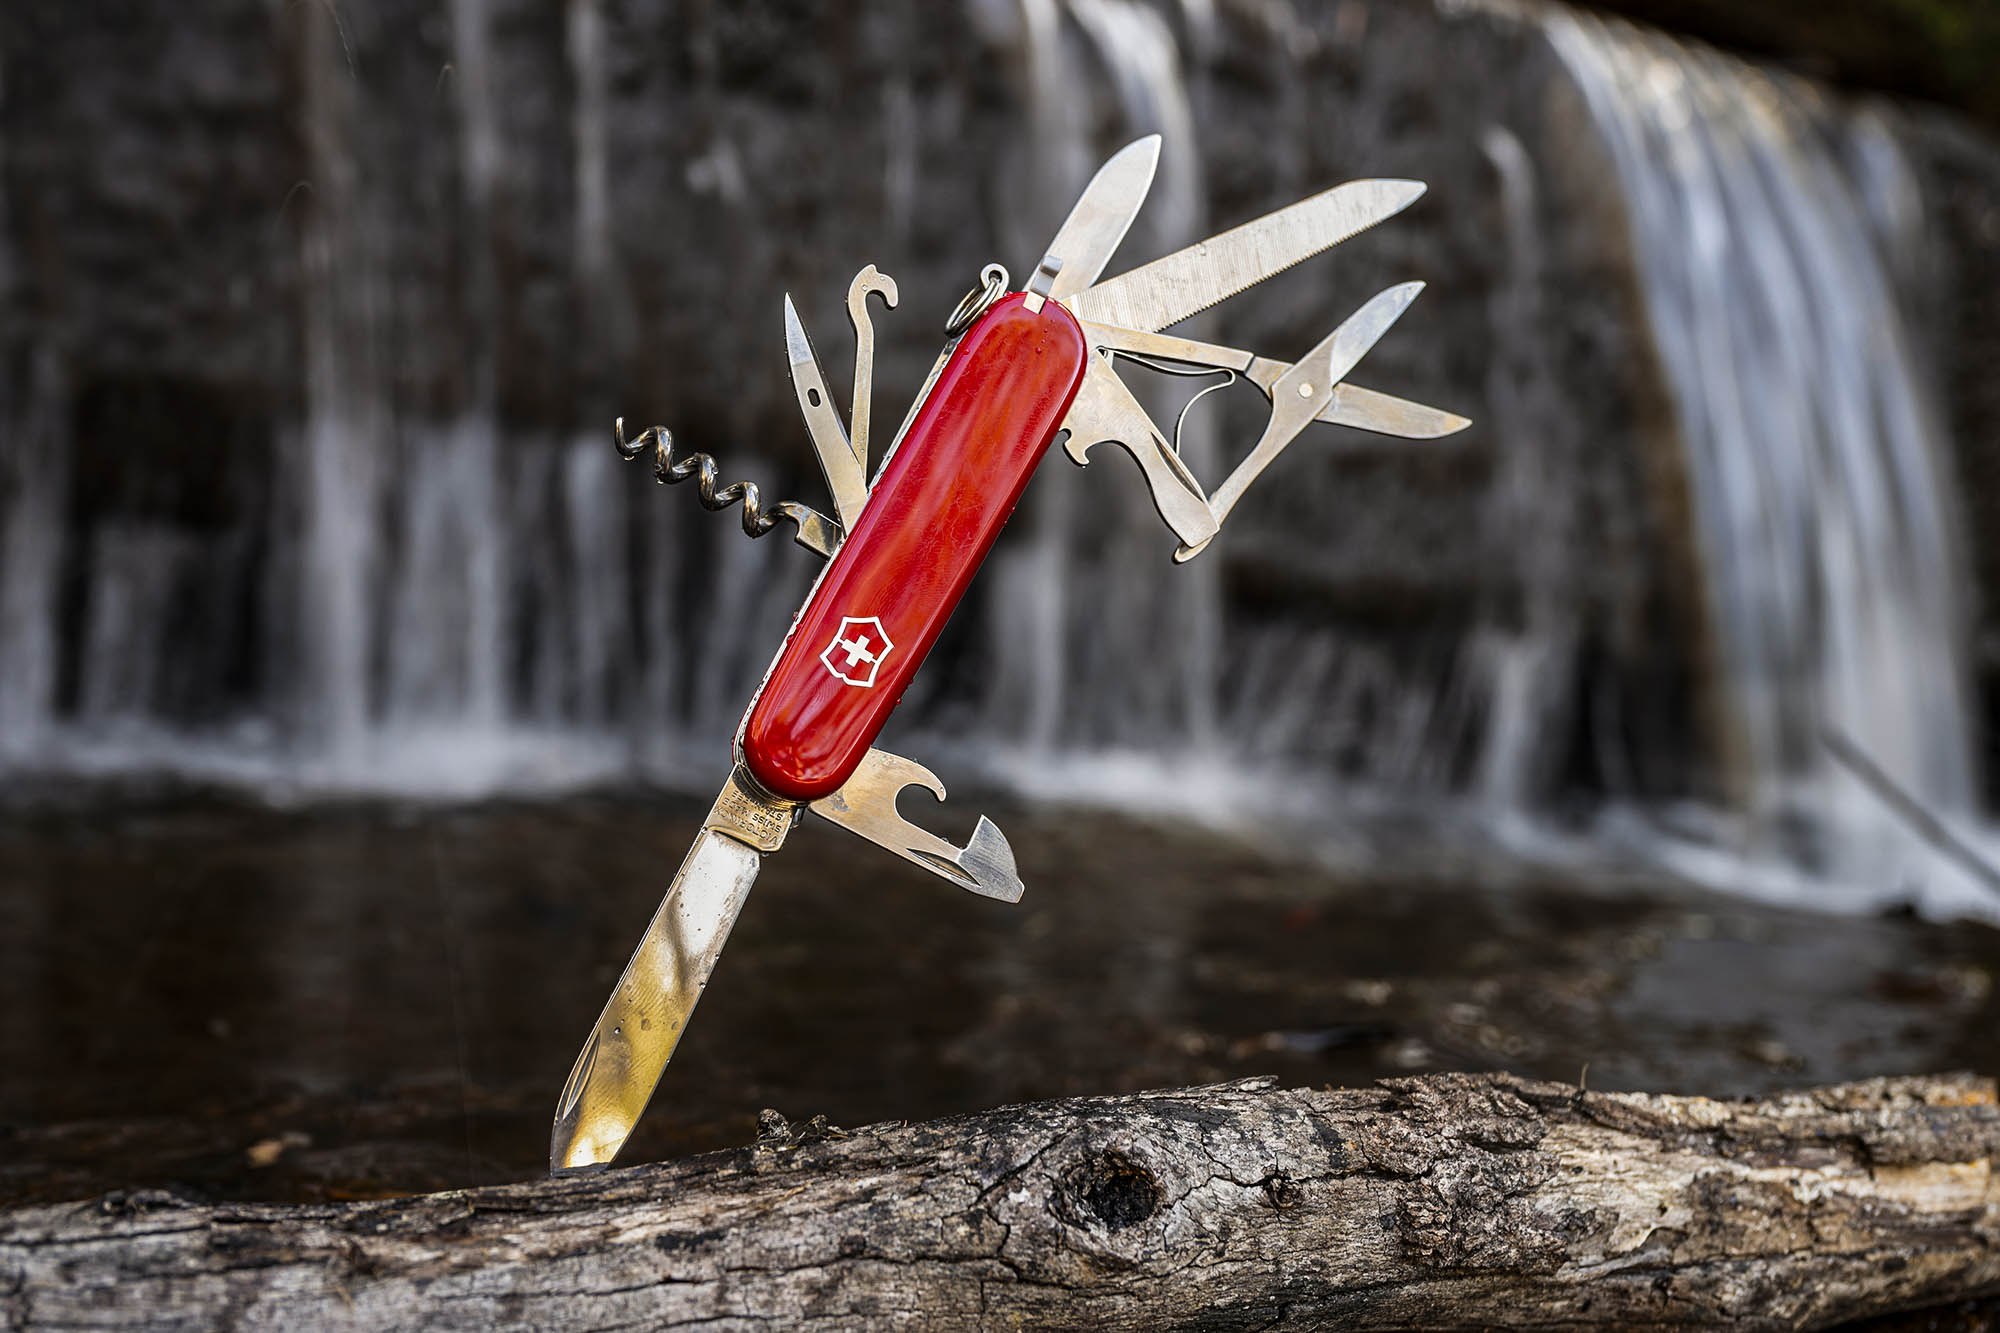 The Victorinox 'Mountaineer' Swiss Army Knife: Tested